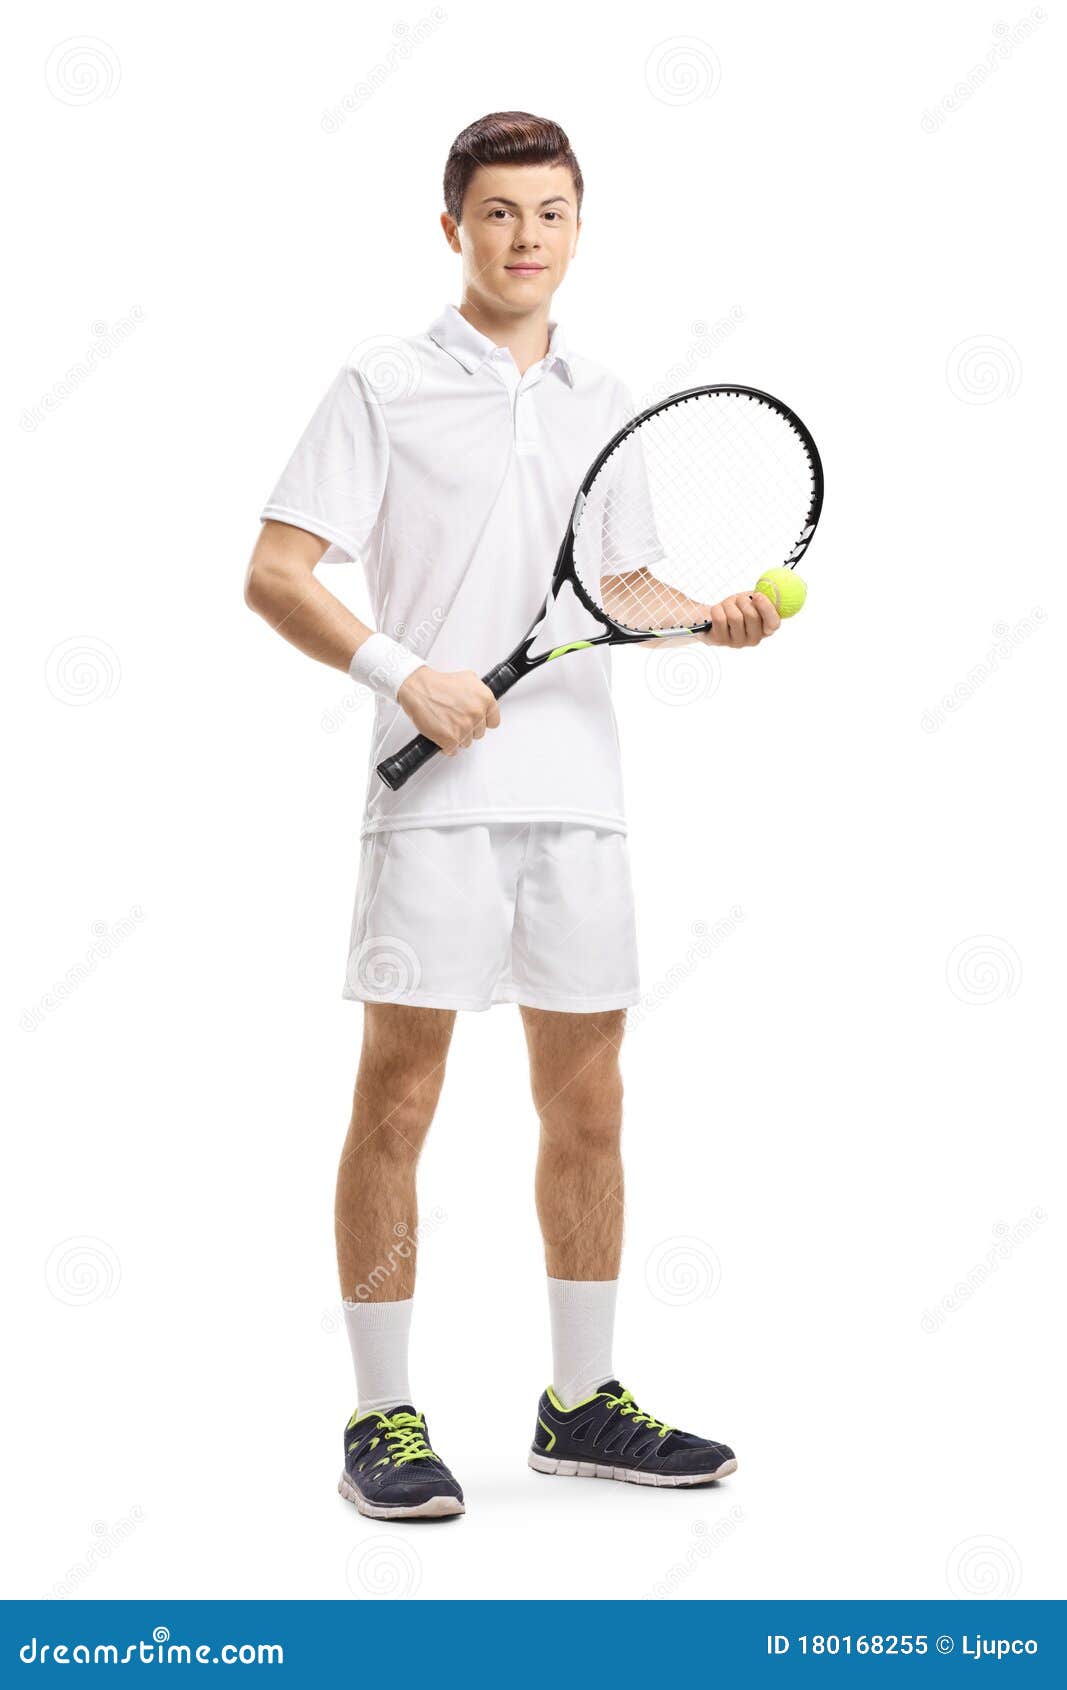 vegne Blank Fryse Male Tennis Player Standing and Holding a Ball and a Racket Stock Image -  Image of active, healthy: 180168255